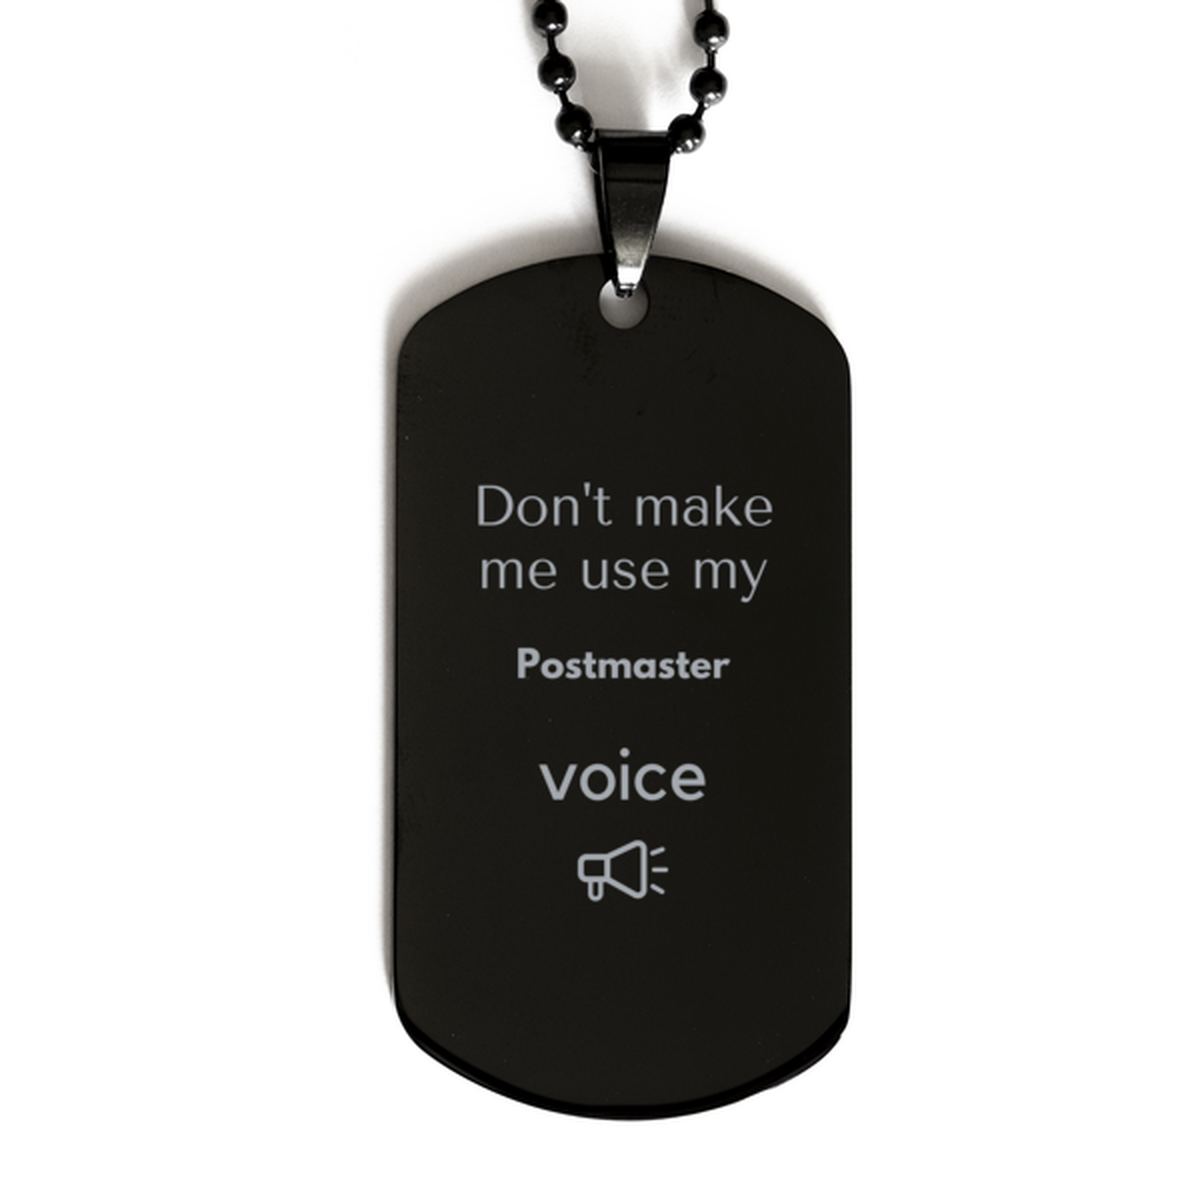 Don't make me use my Postmaster voice, Sarcasm Postmaster Gifts, Christmas Postmaster Black Dog Tag Birthday Unique Gifts For Postmaster Coworkers, Men, Women, Colleague, Friends